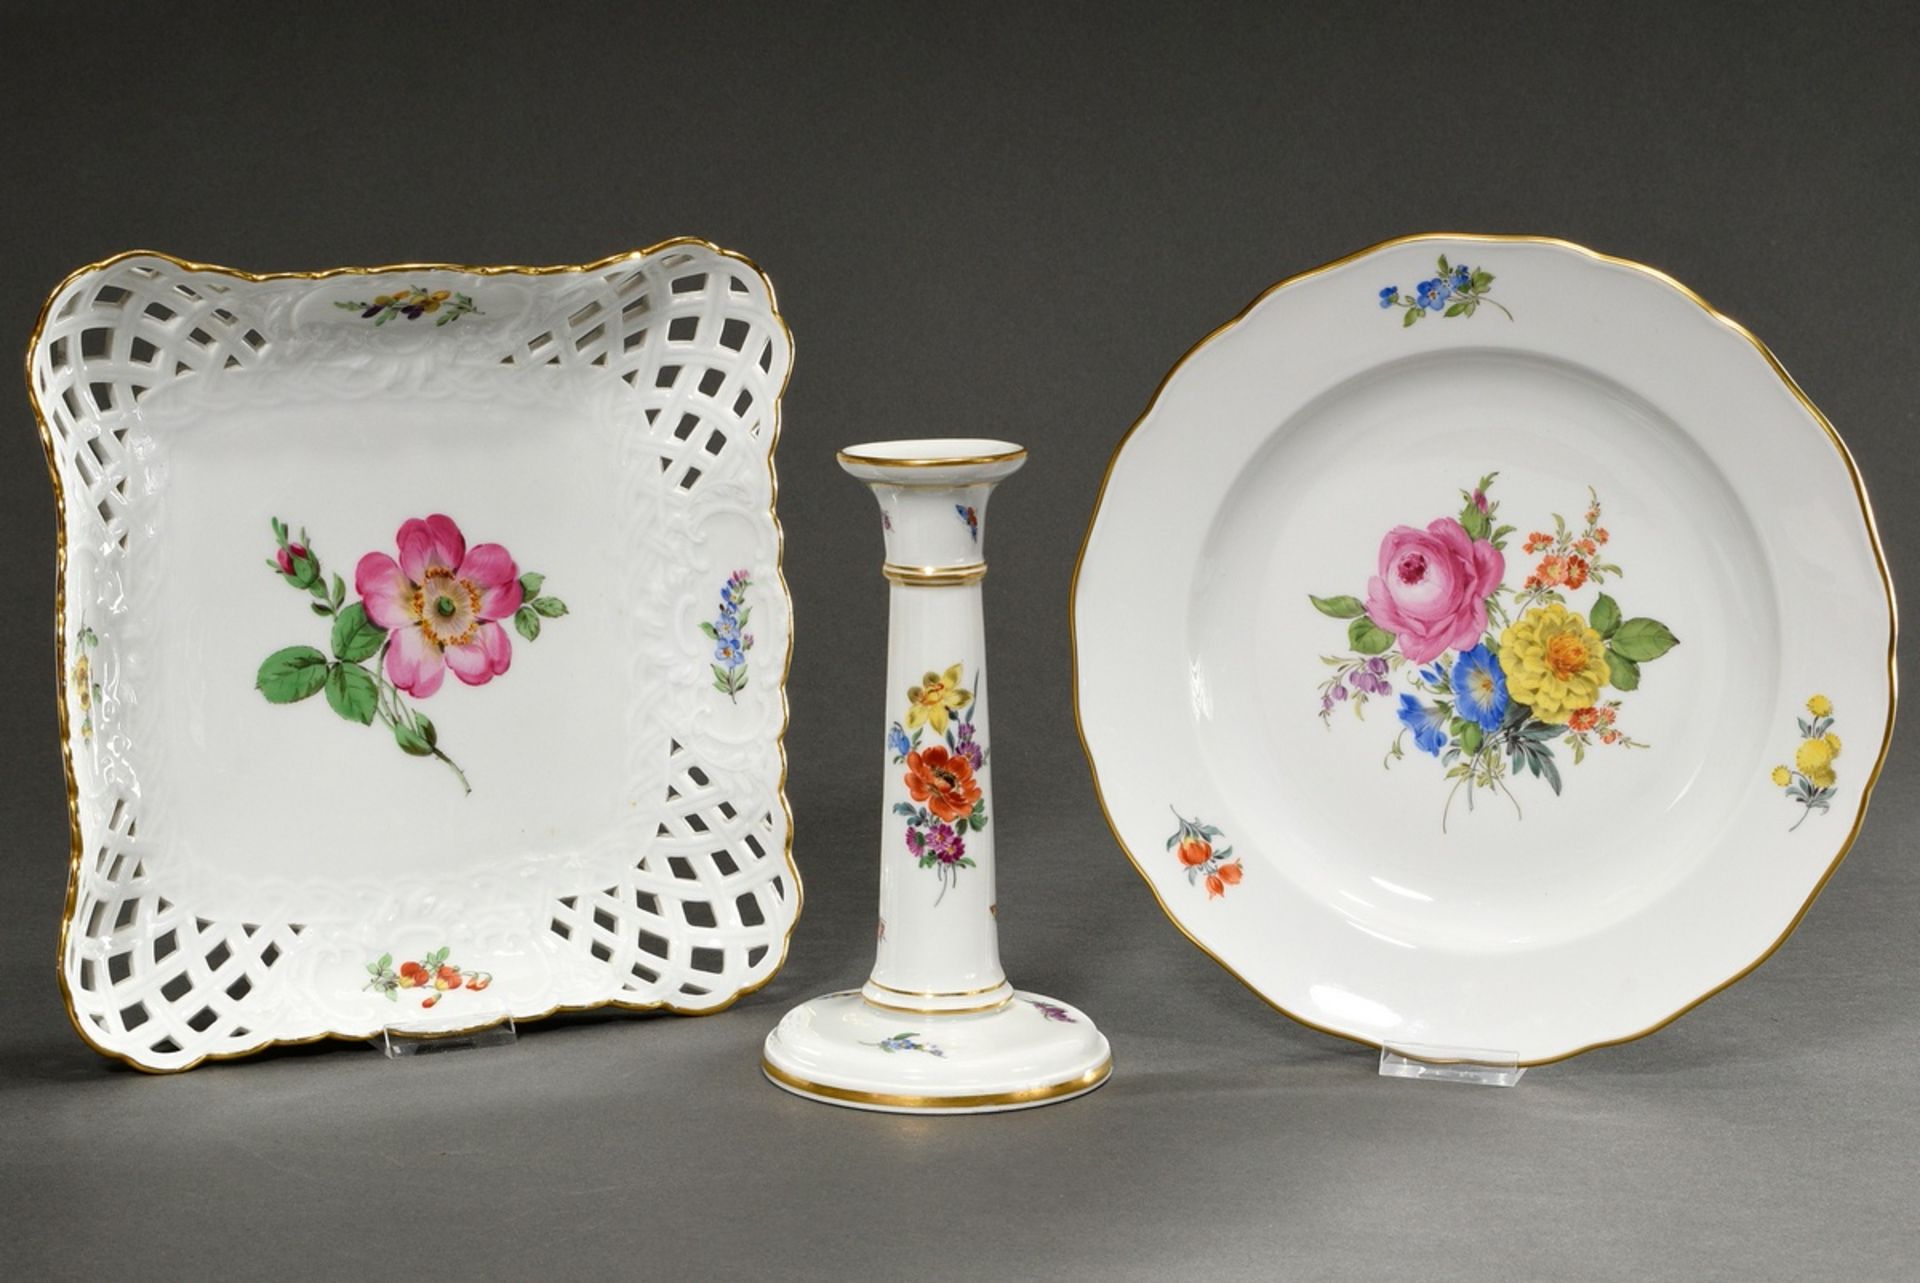 3 Various pieces Meissen with floral decorations, 20th c.: angular bowl with openwork wall (23x23cm